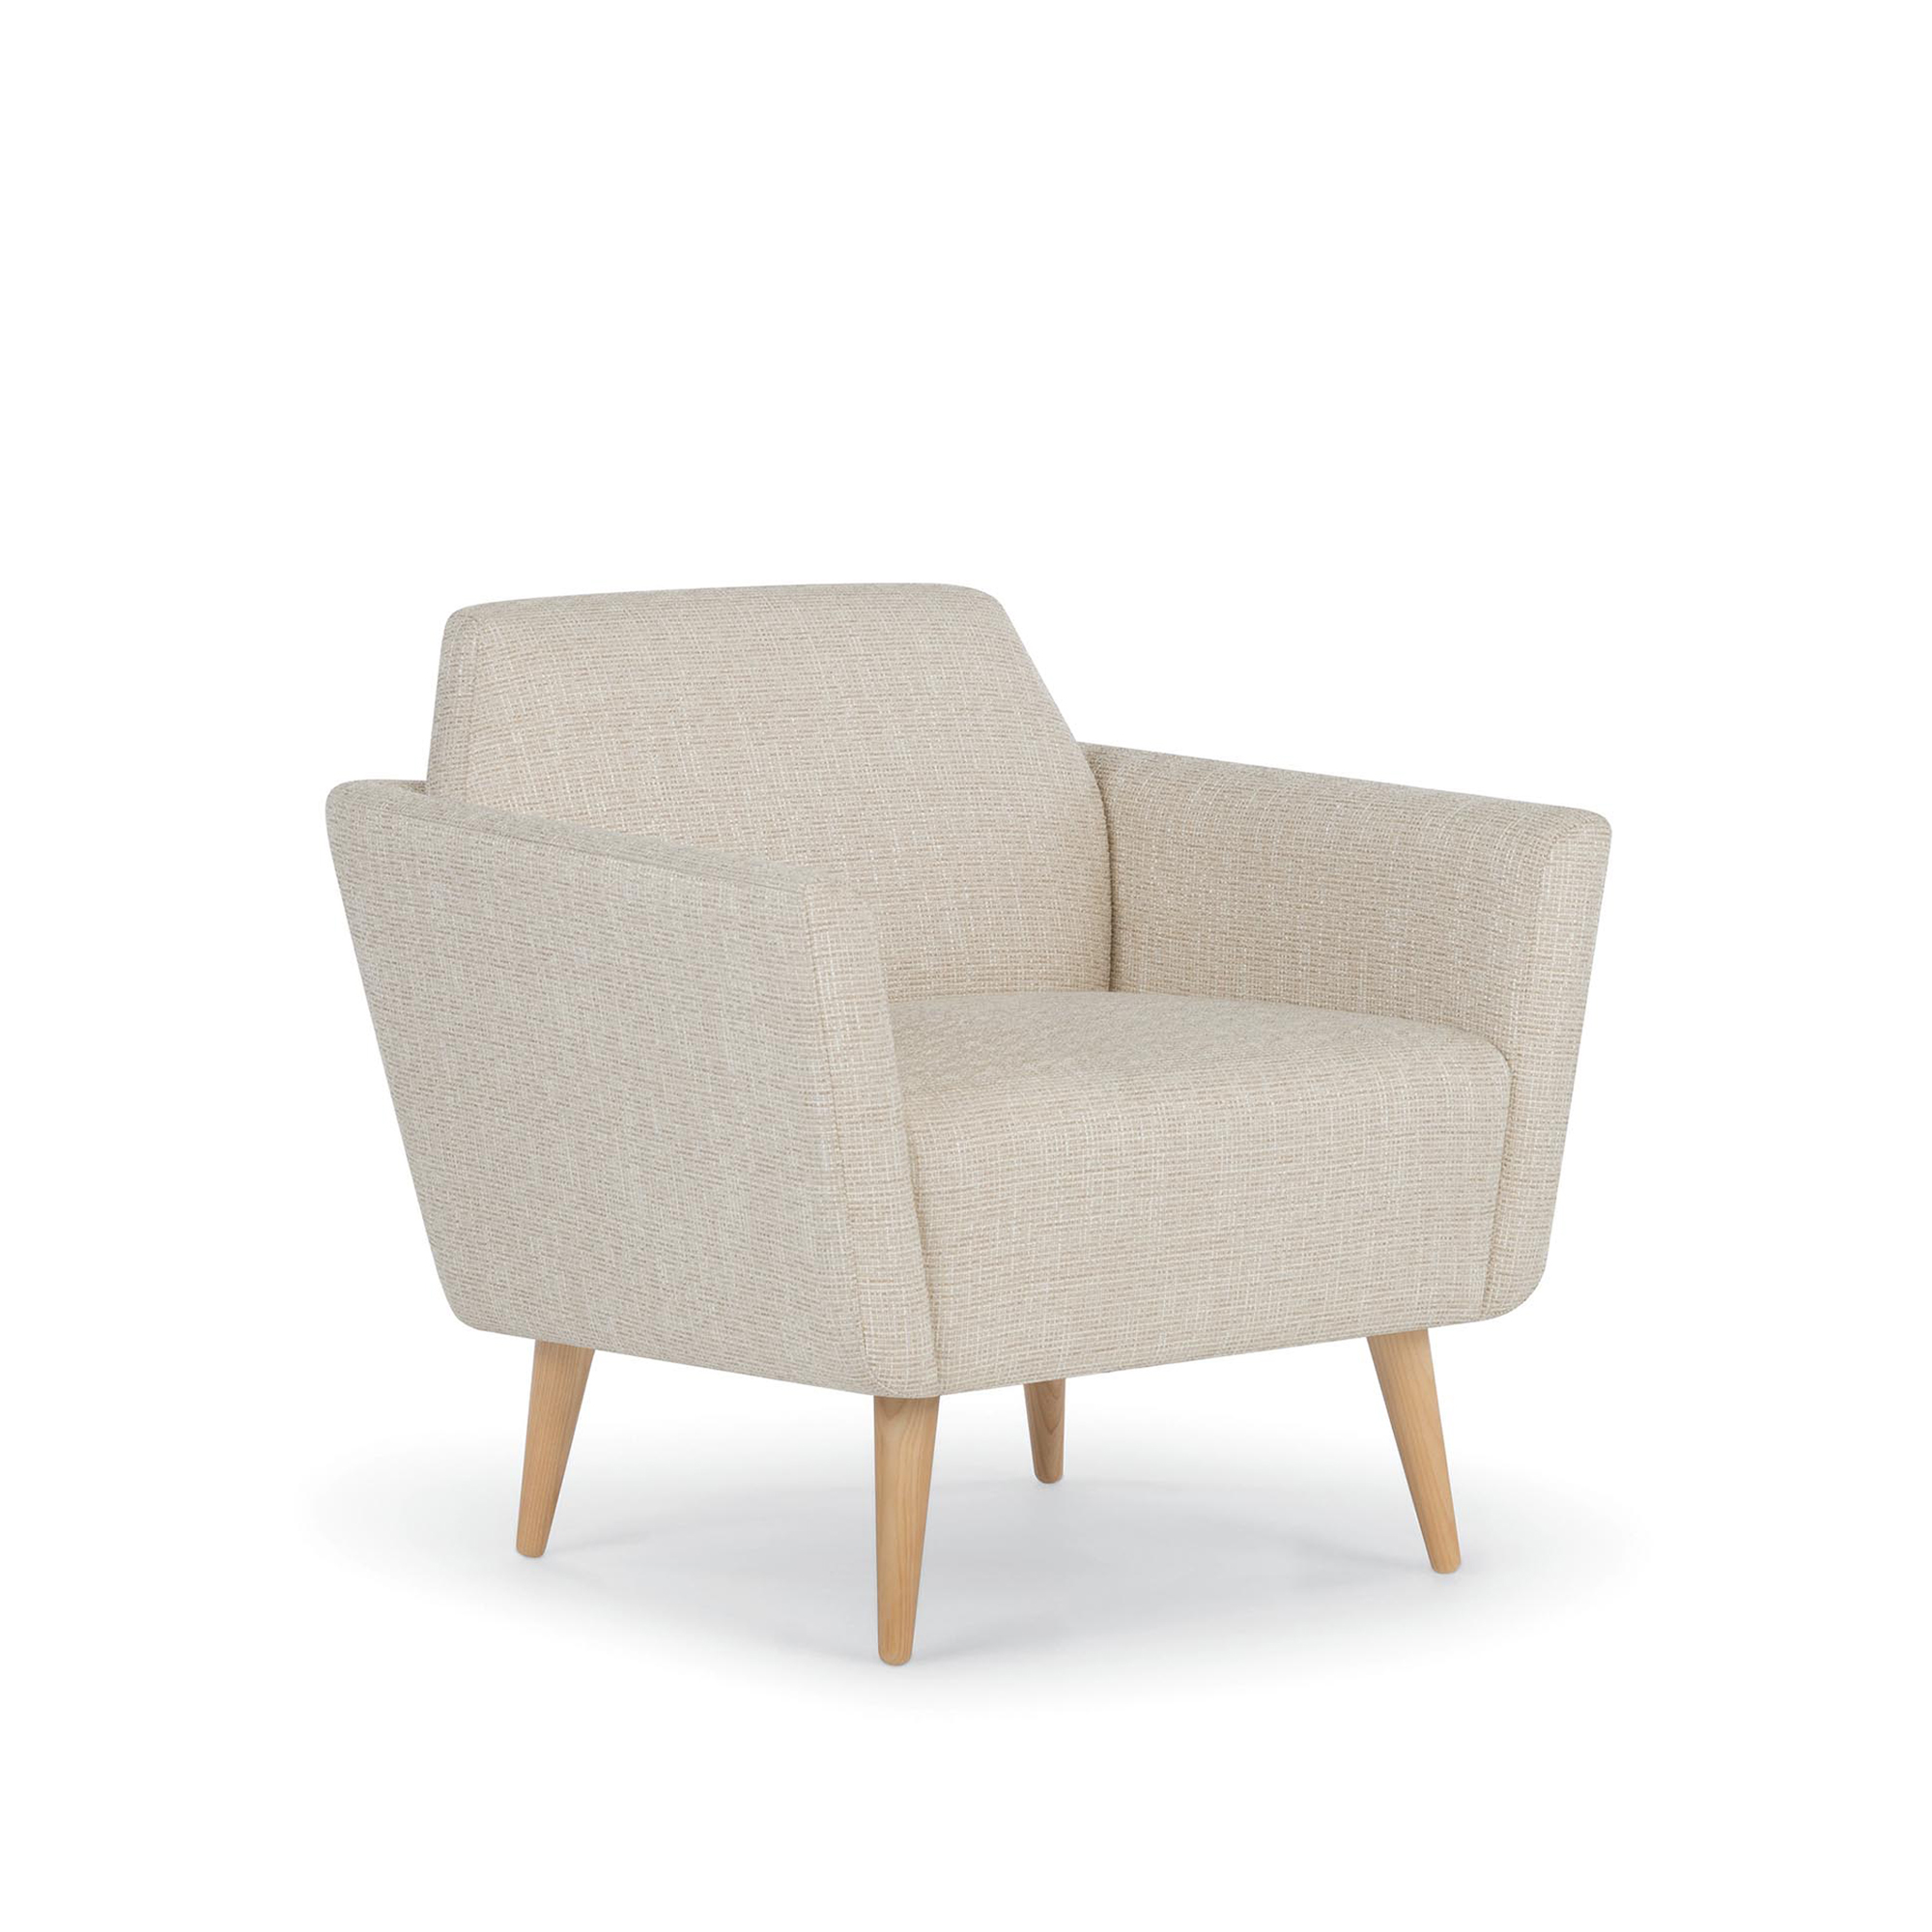 Clipse Lounge Chair with Wood Legs